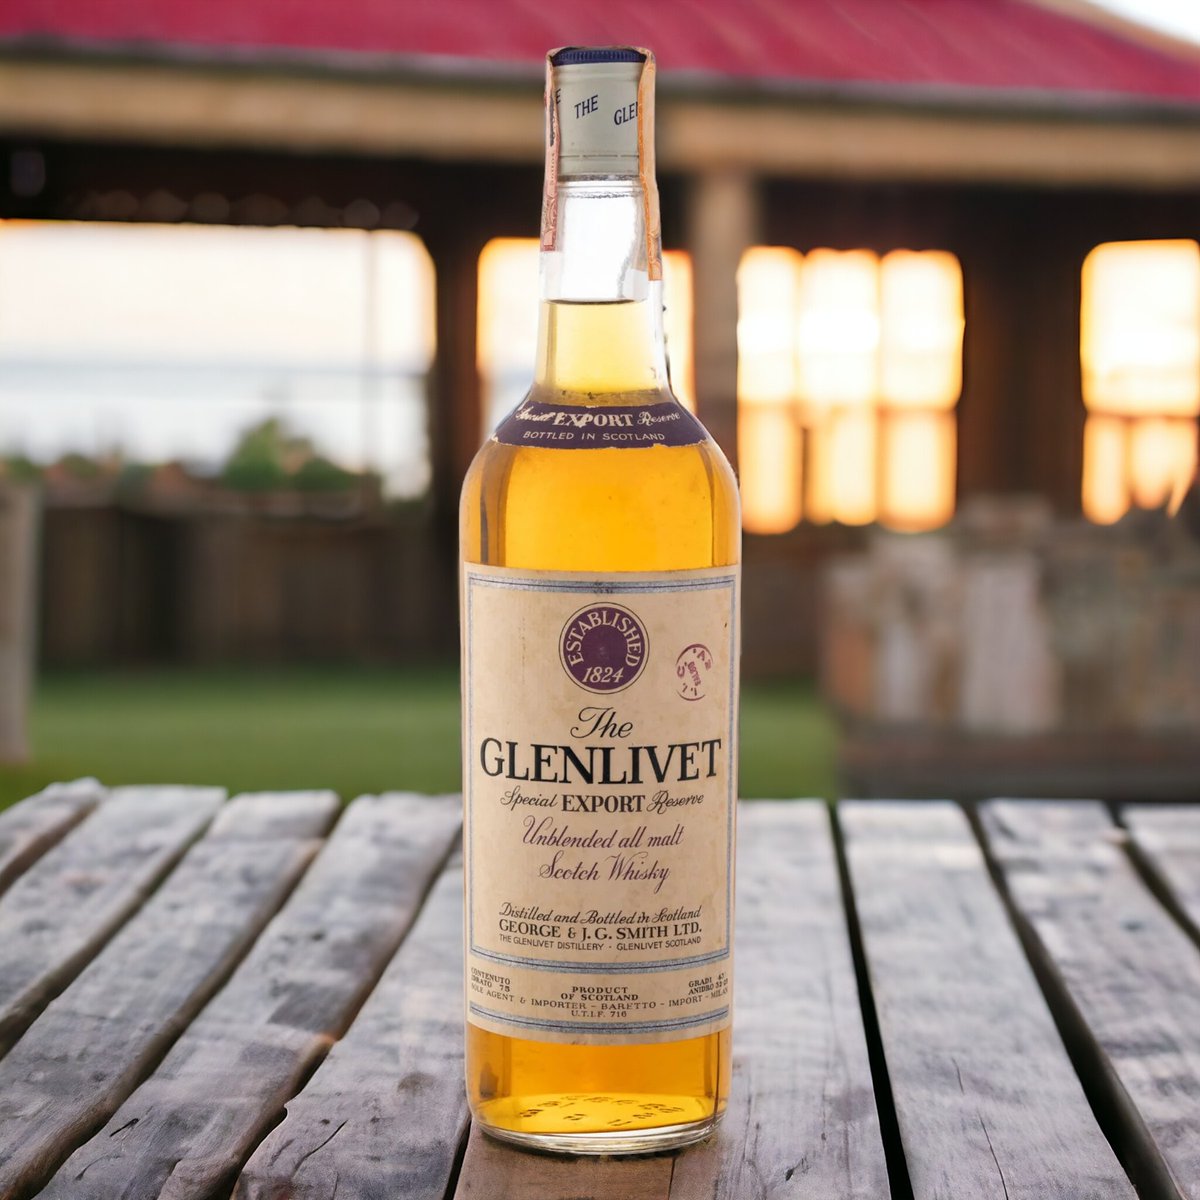 The Glenlivet Special Export Reserve is a timeless Speyside single malt bottled in the 1970s. A piece of whisky history at Rue Pinard! #whiskycollector